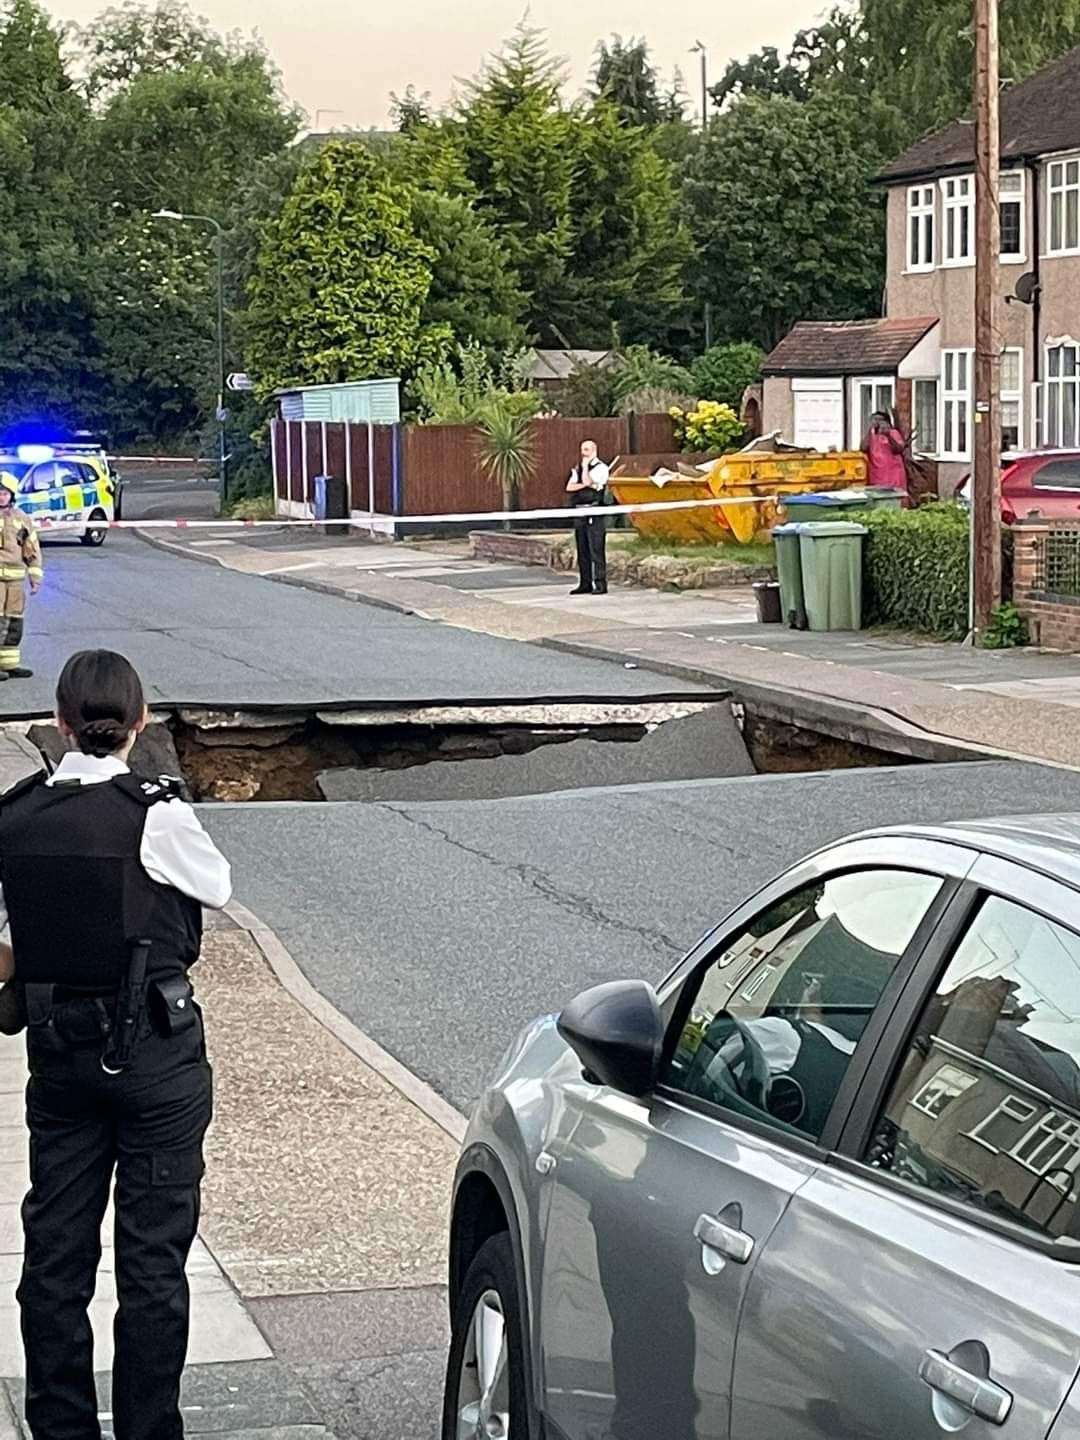 Liam Edwards, 25, who lives on Leysdown Avenue, said he heard a ‘massive thud’ as part of the road next to his collapsed (Liam Edwards/PA)